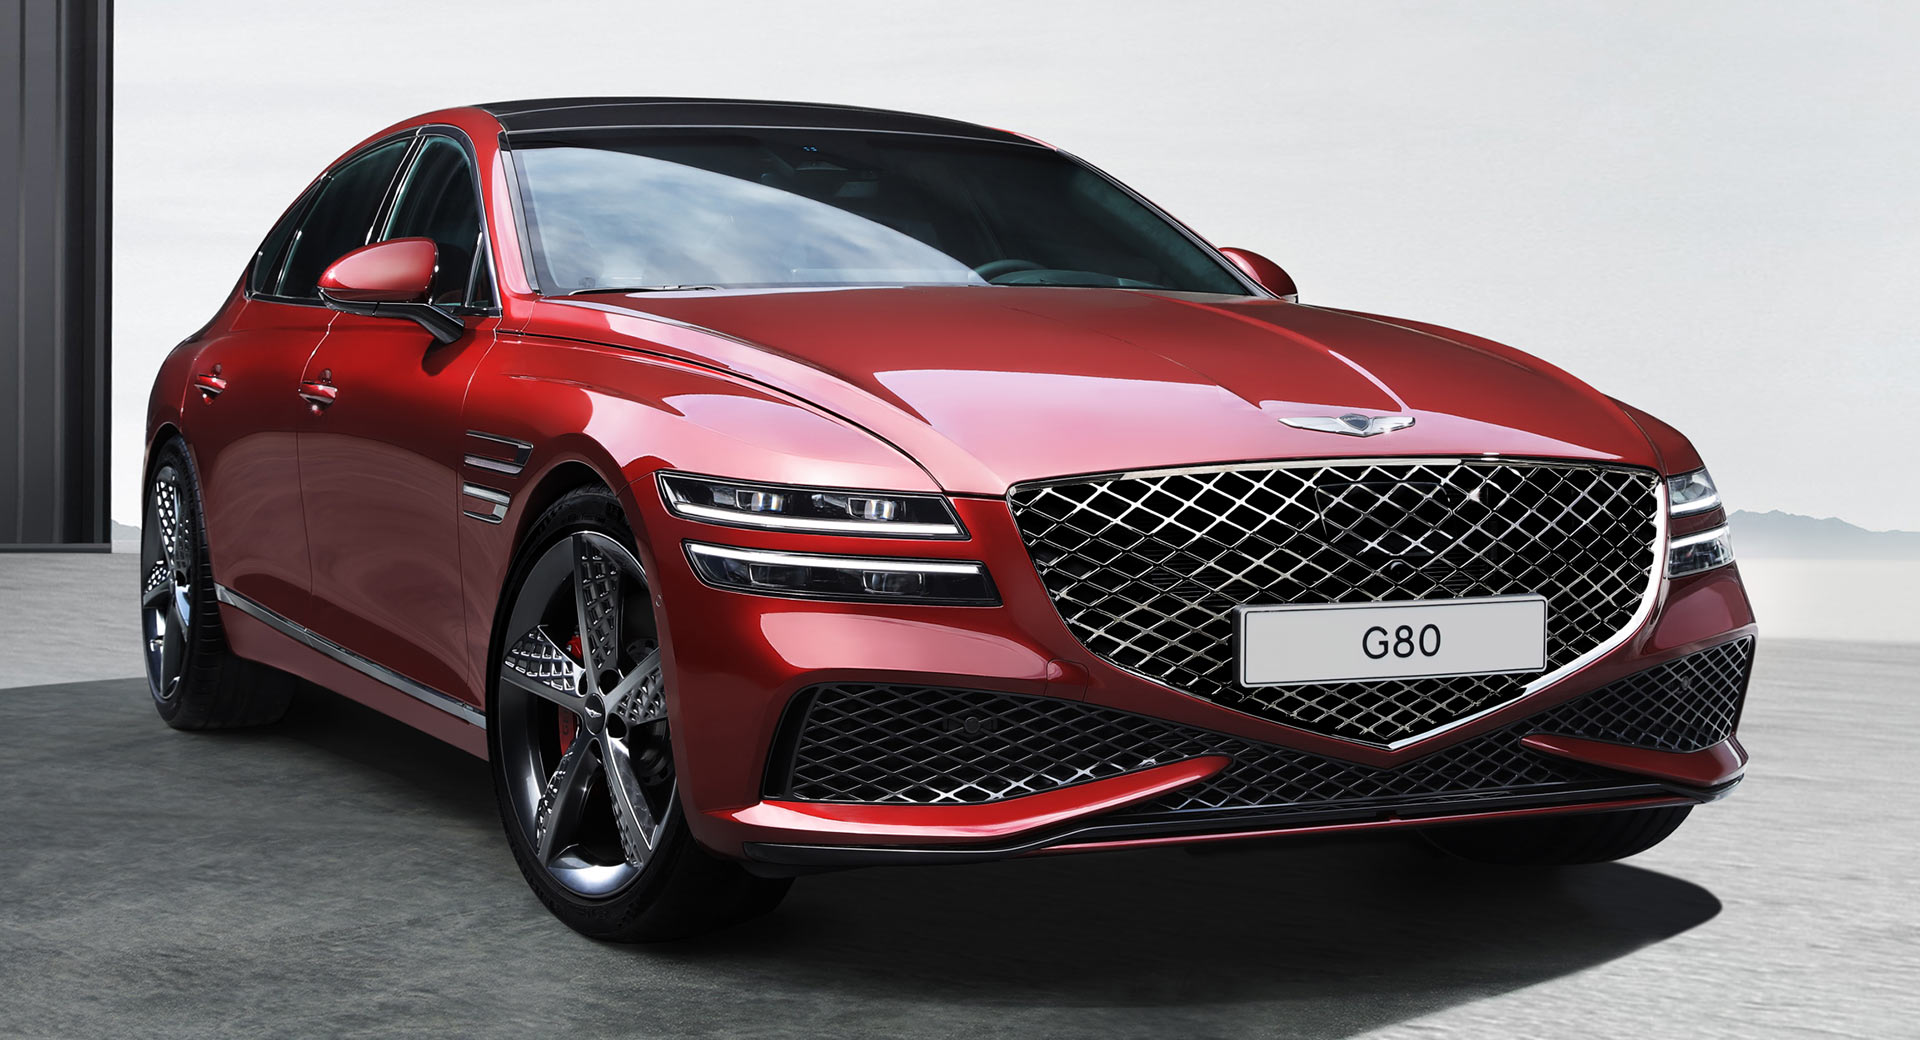 2022 Genesis G80 Range Priced From 48,000, Adds New Sport Variant